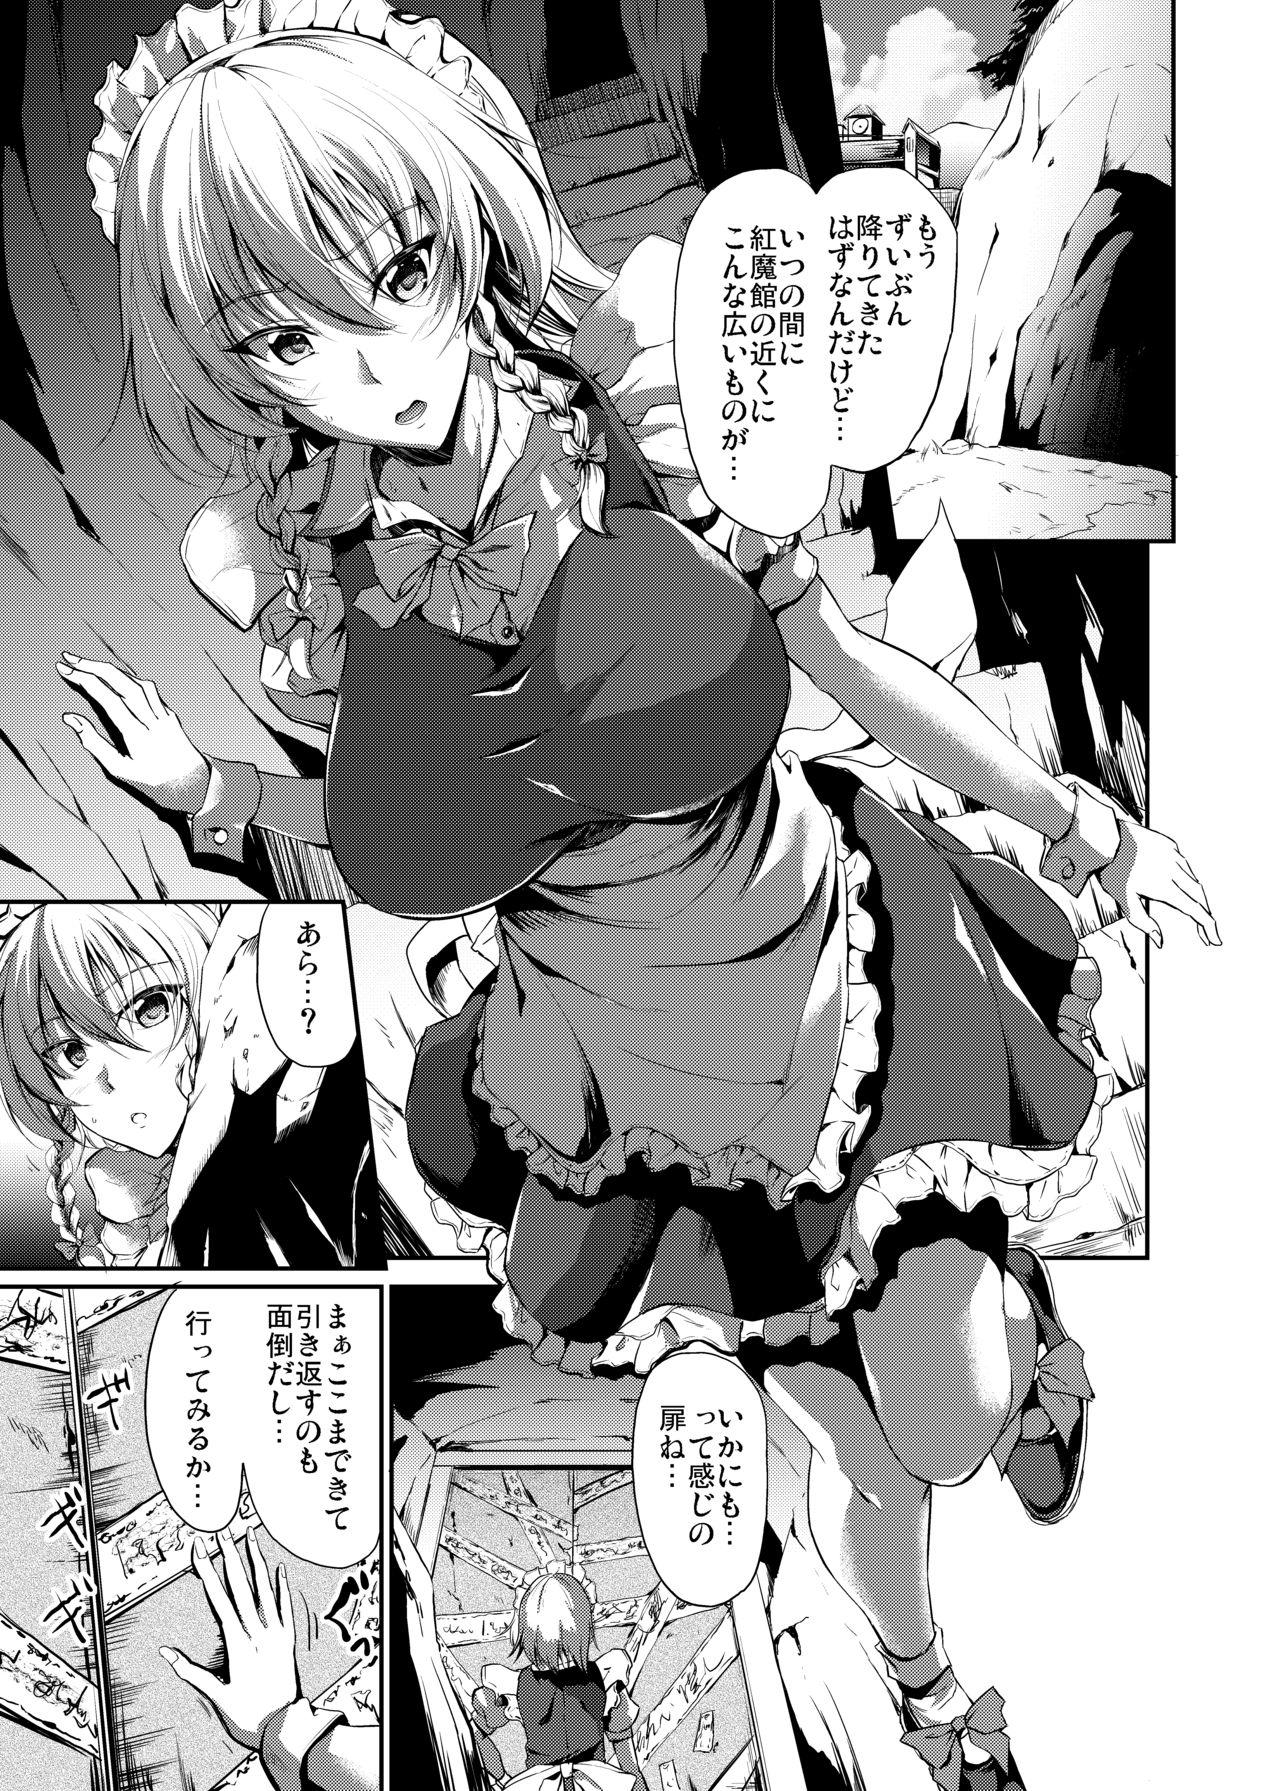 Milf Cougar Ero Trap Dungeon: HELL - Touhou project Suruba - Page 3